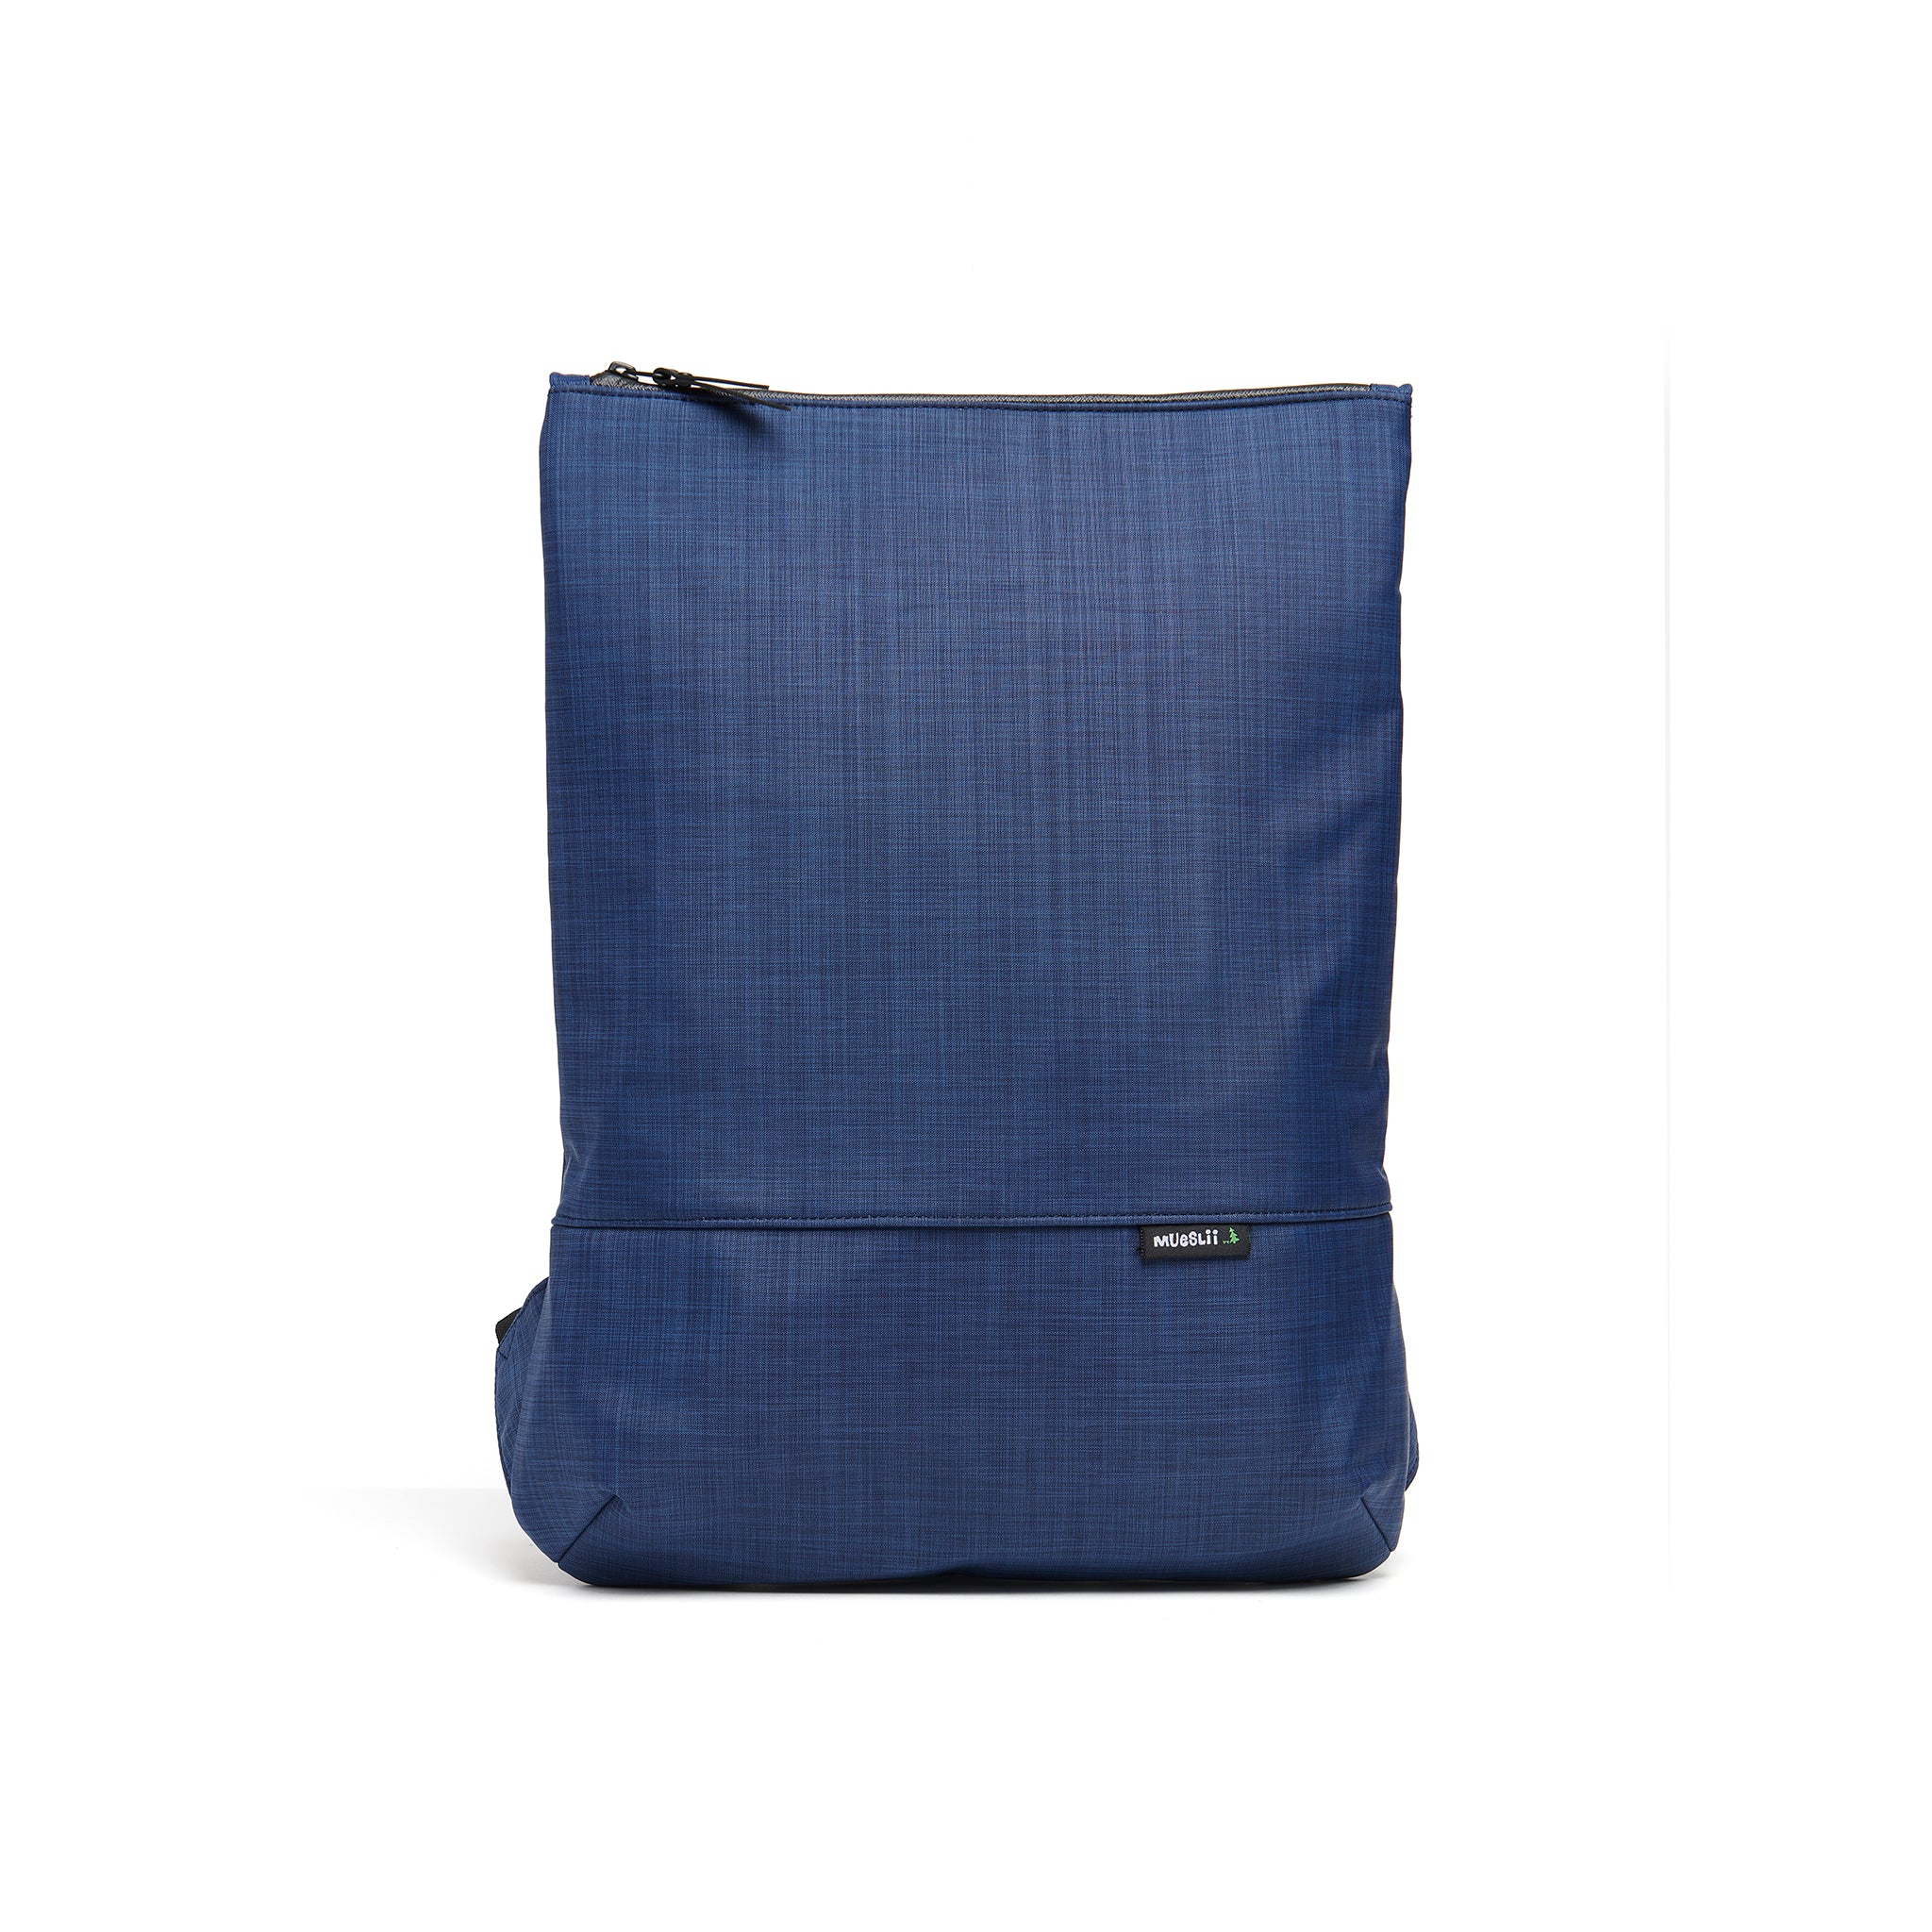 Mueslii light backpack, made of water resistant canvas nylon, with a laptop compartment, color ocean blue, front view.